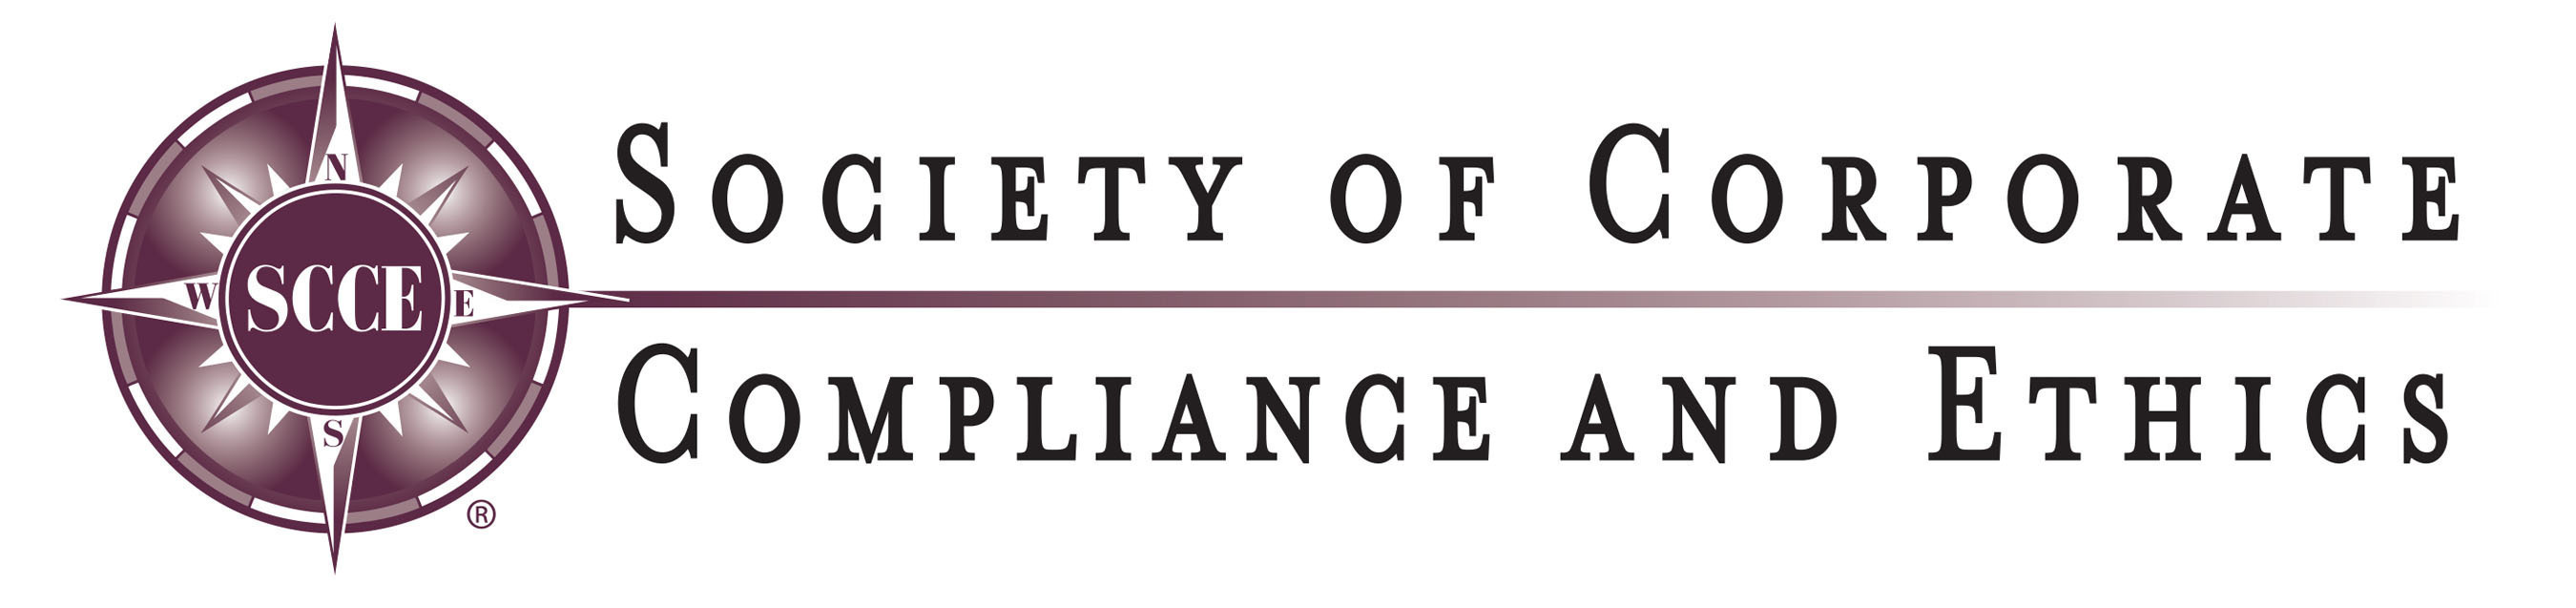 Society of Corporate Compliance and Ethics logo.